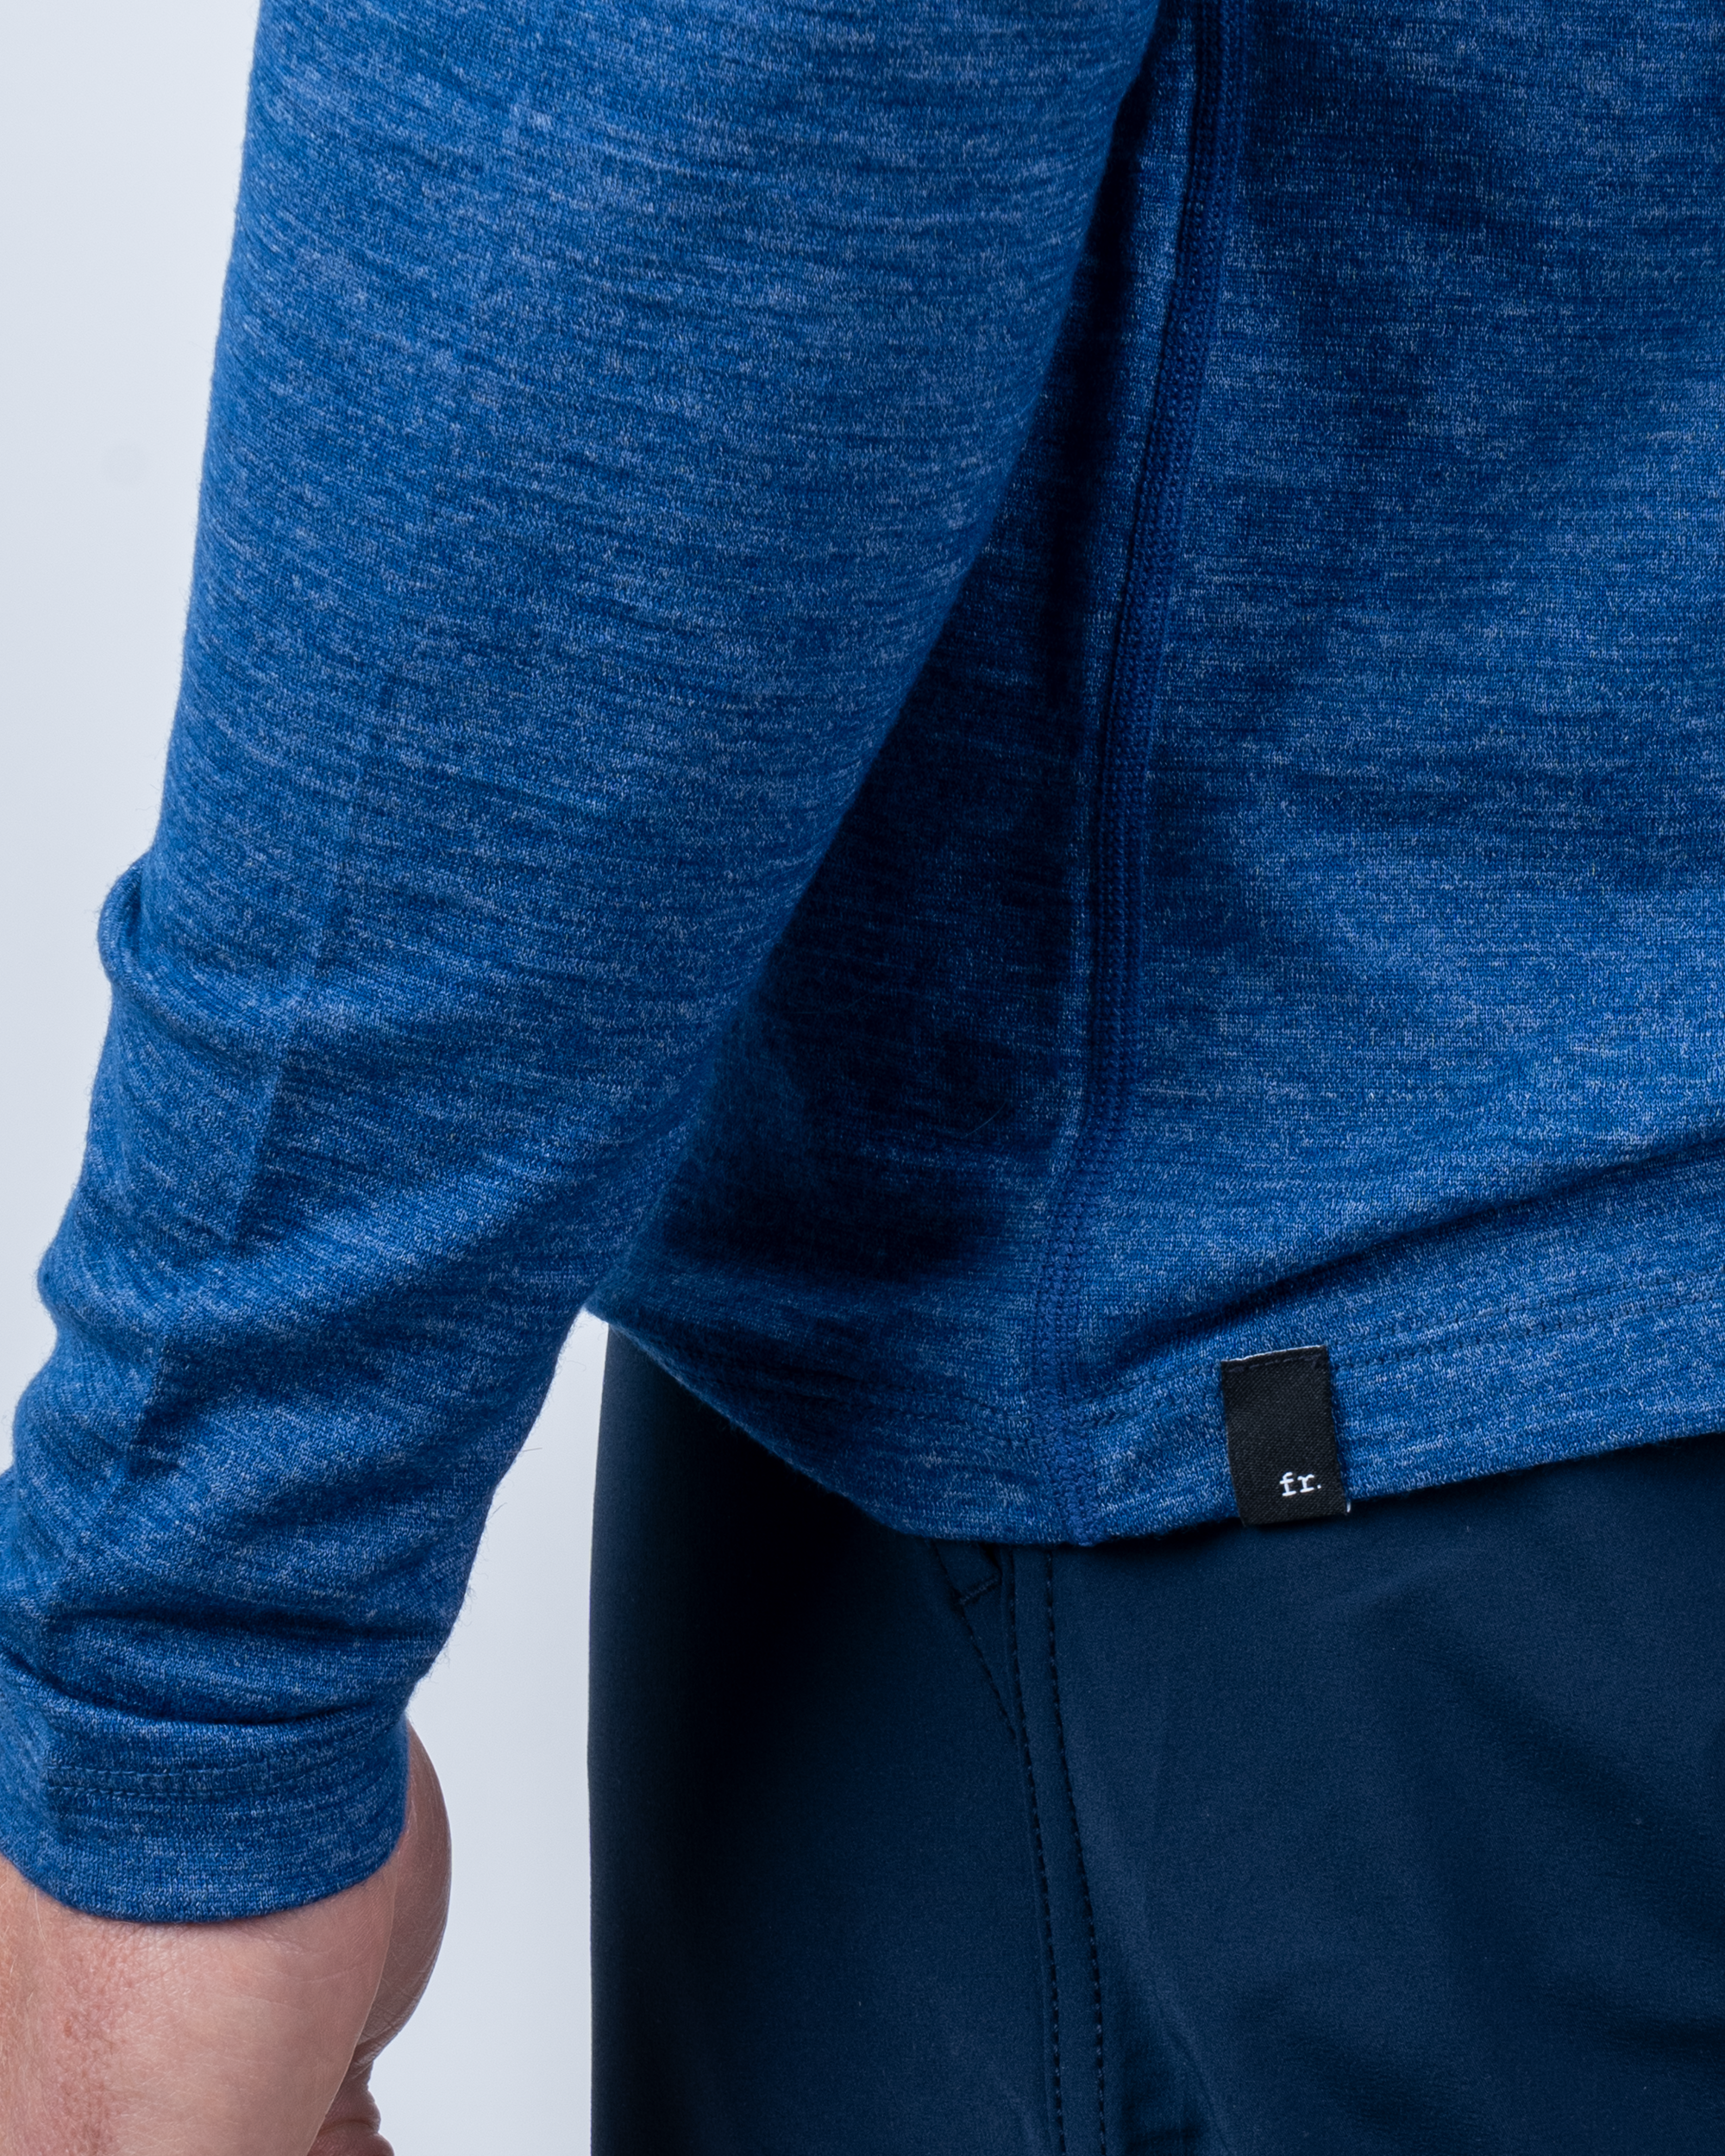 Foreign Rider Co Nuyarn Merino Wool Blue Heather Base Layer Long Sleeve T-Shirt Side Bottom FR Tag Close Up